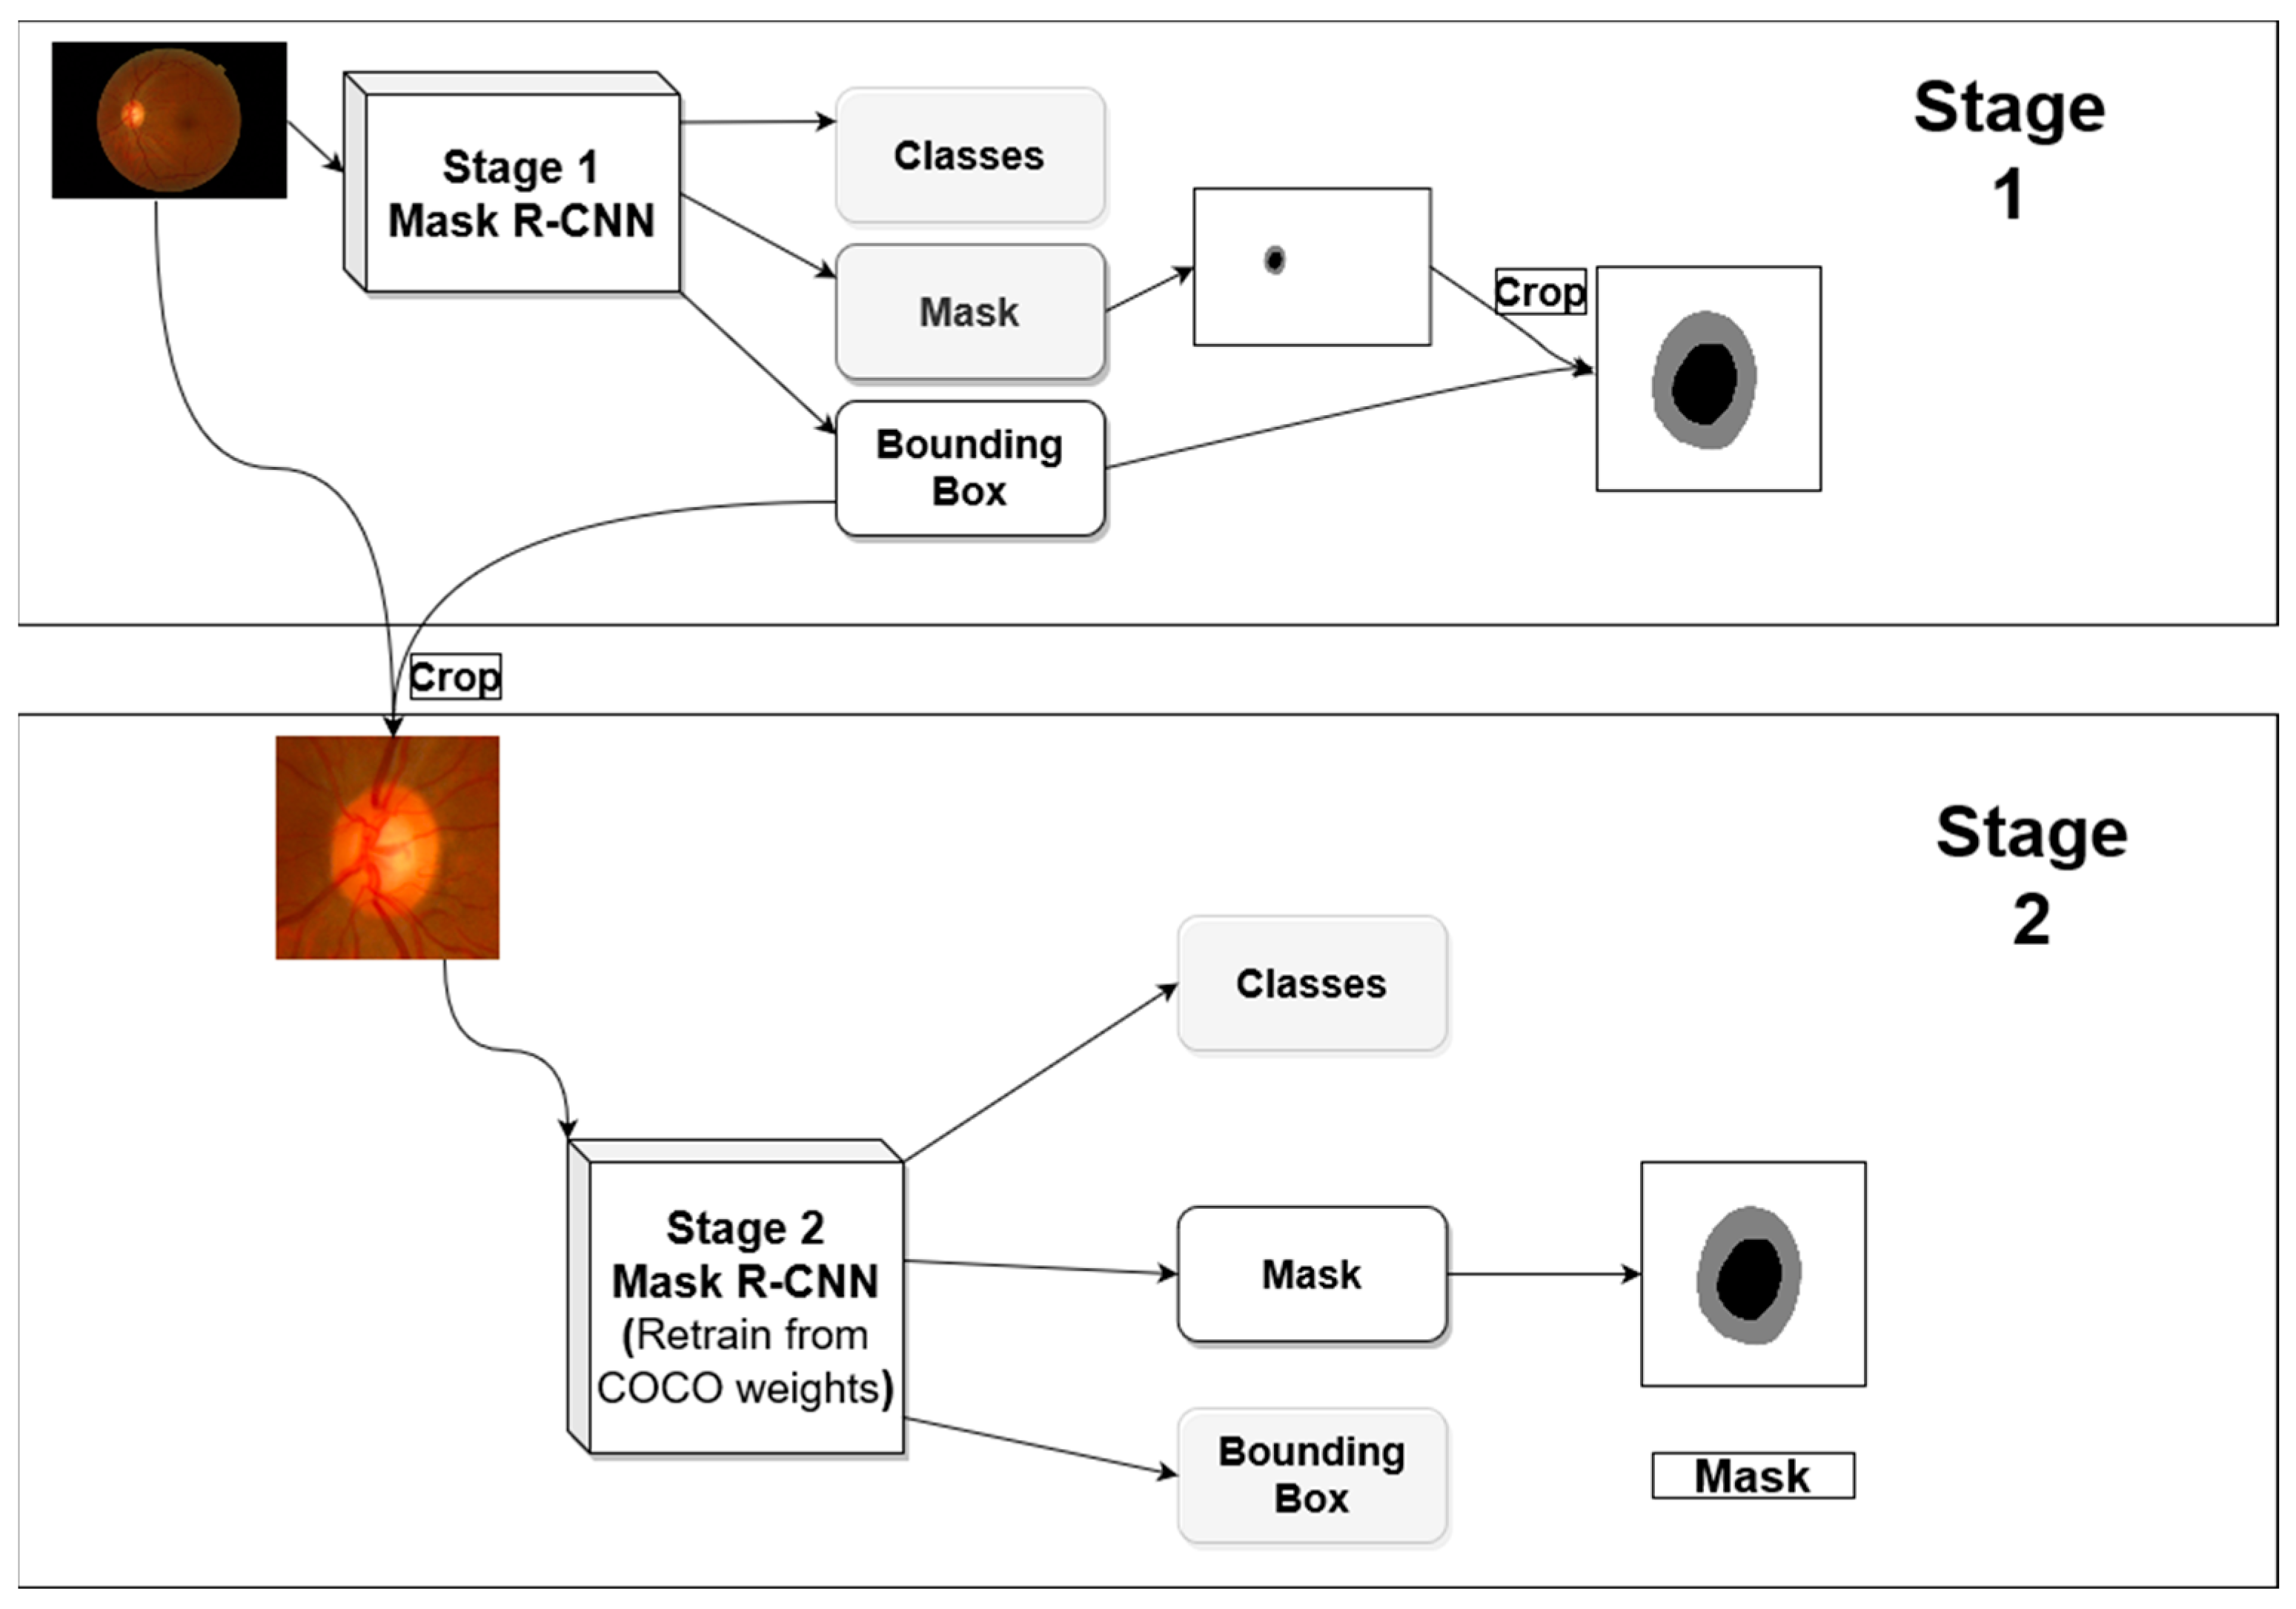 Applied Sciences | Free Full-Text | Two-Stage Mask-RCNN Approach for  Detecting and Segmenting the Optic Nerve Head, Optic Disc, and Optic Cup in  Fundus Images | HTML